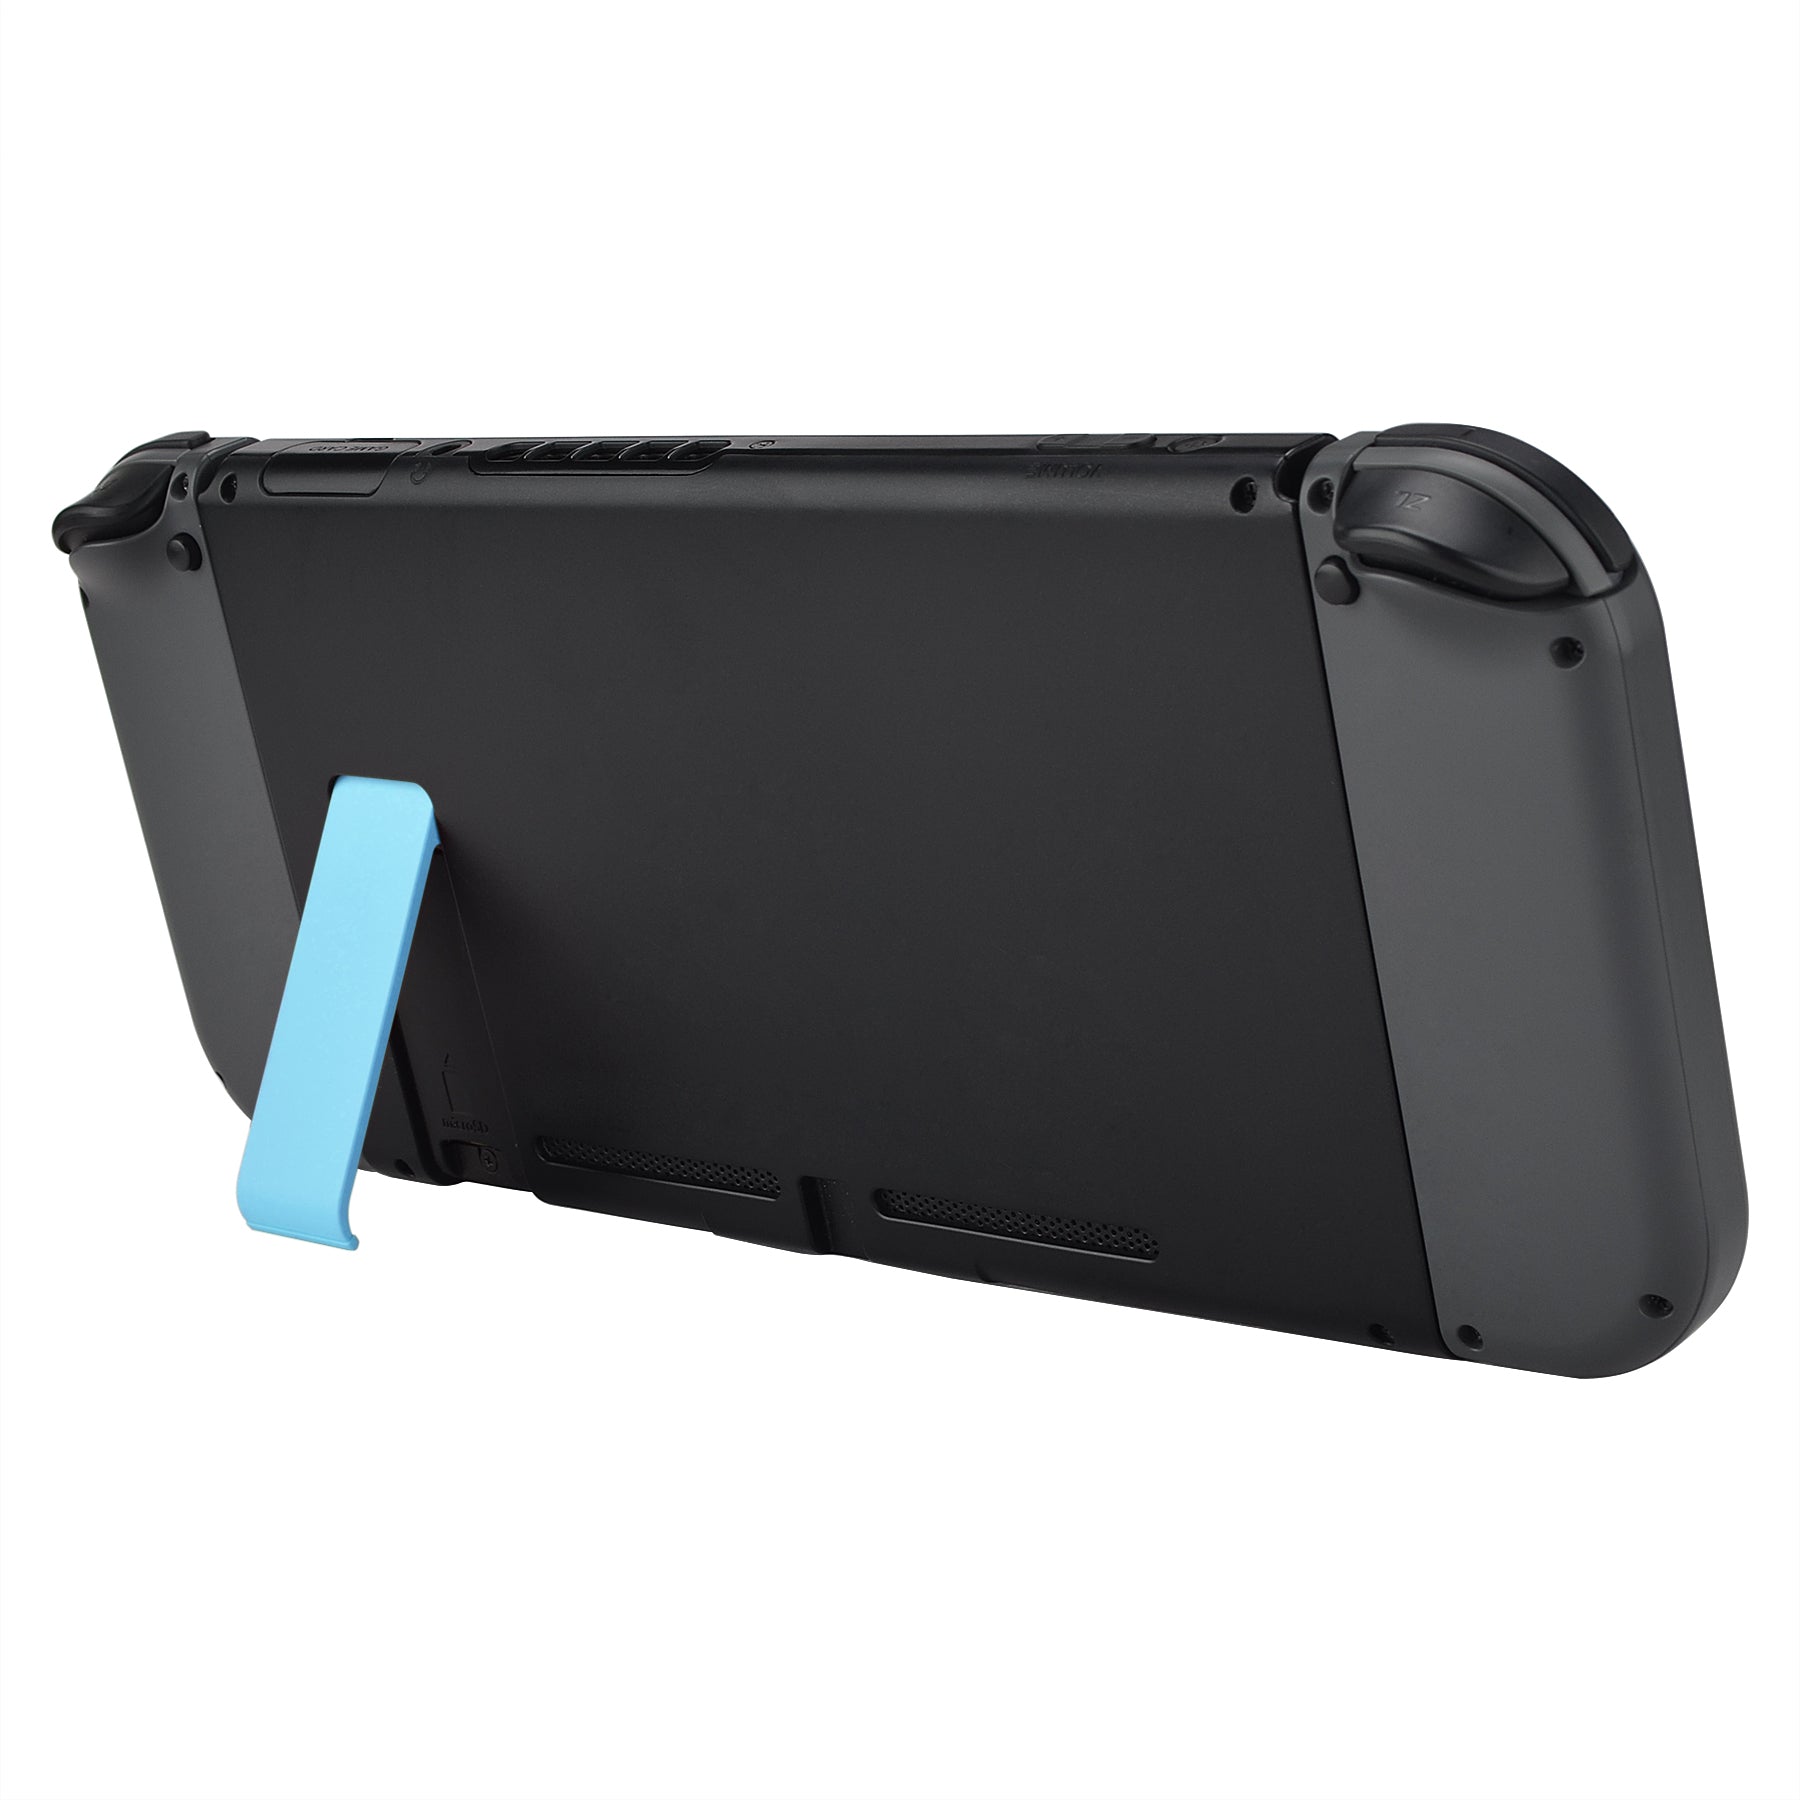 eXtremeRate Retail 2 Set of Heaven Blue Soft Touch Replacement Kickstand for Nintendo Switch Console, Back Bracket Holder Kick Stand for Nintendo Switch - Console NOT Included - AJ415